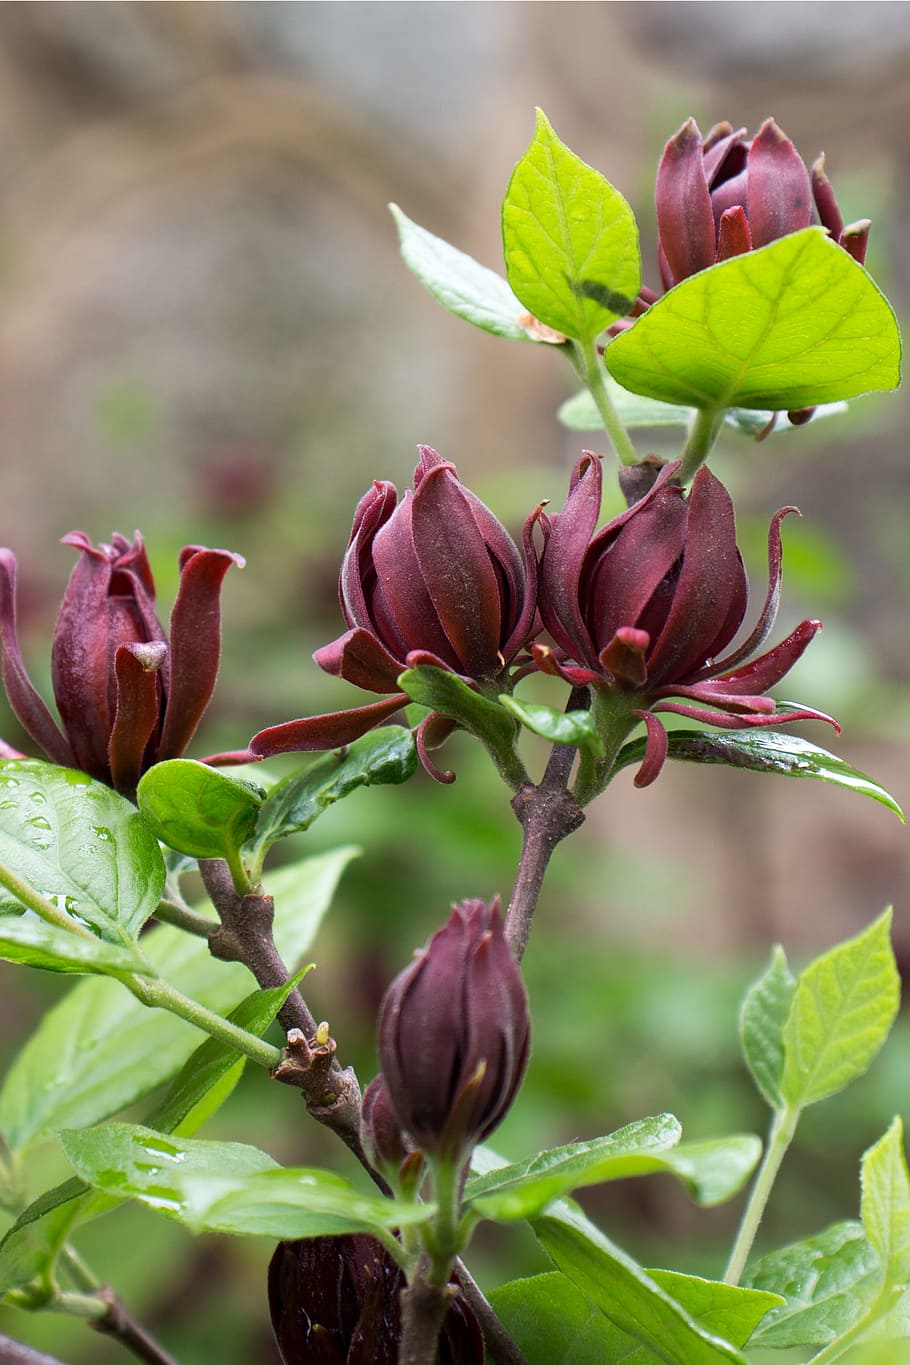 Calycanthus floridus, commonly called Carolina allspice, is an uncommon rounded deciduous shrub that grows to 6-9 tall. It features fragrant, brown to burgundy flowers which come into bloom from mid-April to mid-May. Flowers give way to brownish, urn-shaped fruits seed pods which mature in the fall and last throughout the winter months. The dark, lustrous, green leaves and bark release a clove or camphor-like scent when crushed. Both the flowers and leaves are often used to make potpourris. Other names used are sweetshrub, strawberry bush, and hairy allspice. The shrub is native to the US from Virginia to Florida., HD wallpaper